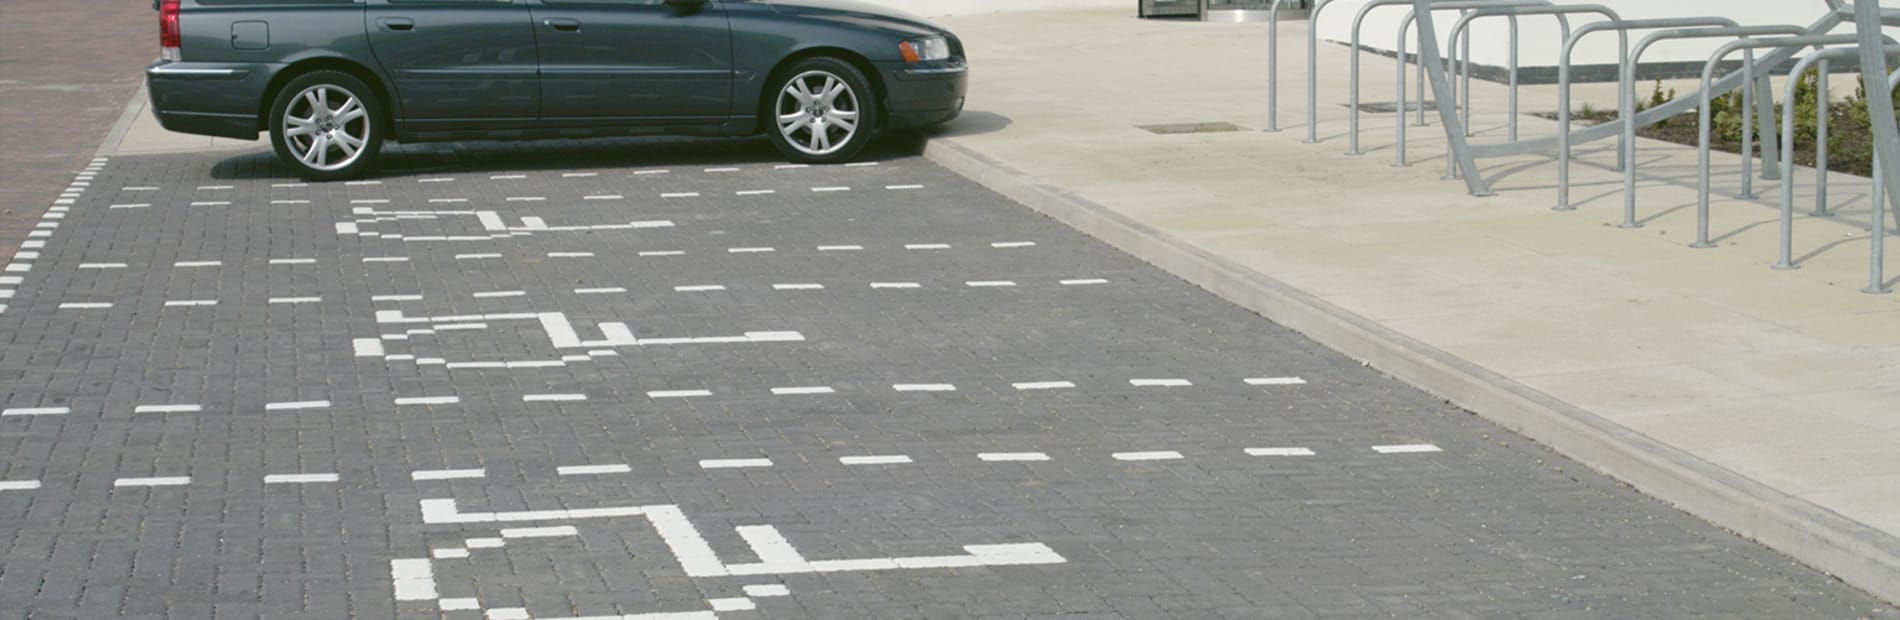 White marker blocks used to outline car spaces inside car park.